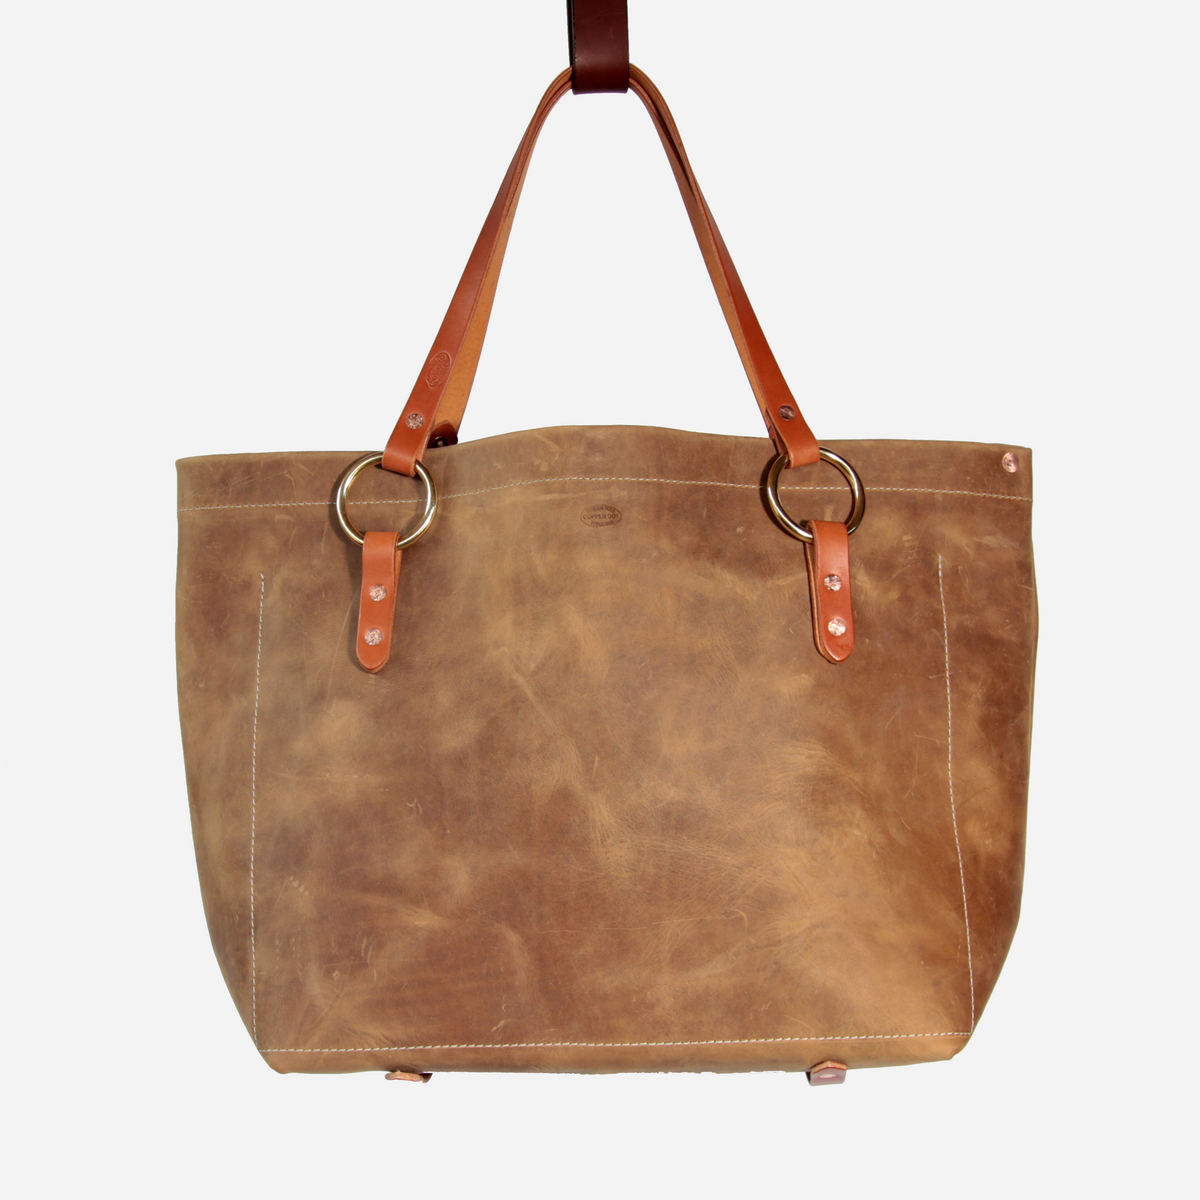 Sandstone No. 2 Tote Copperdot Leather Goods Made in Jackson Hole, WY